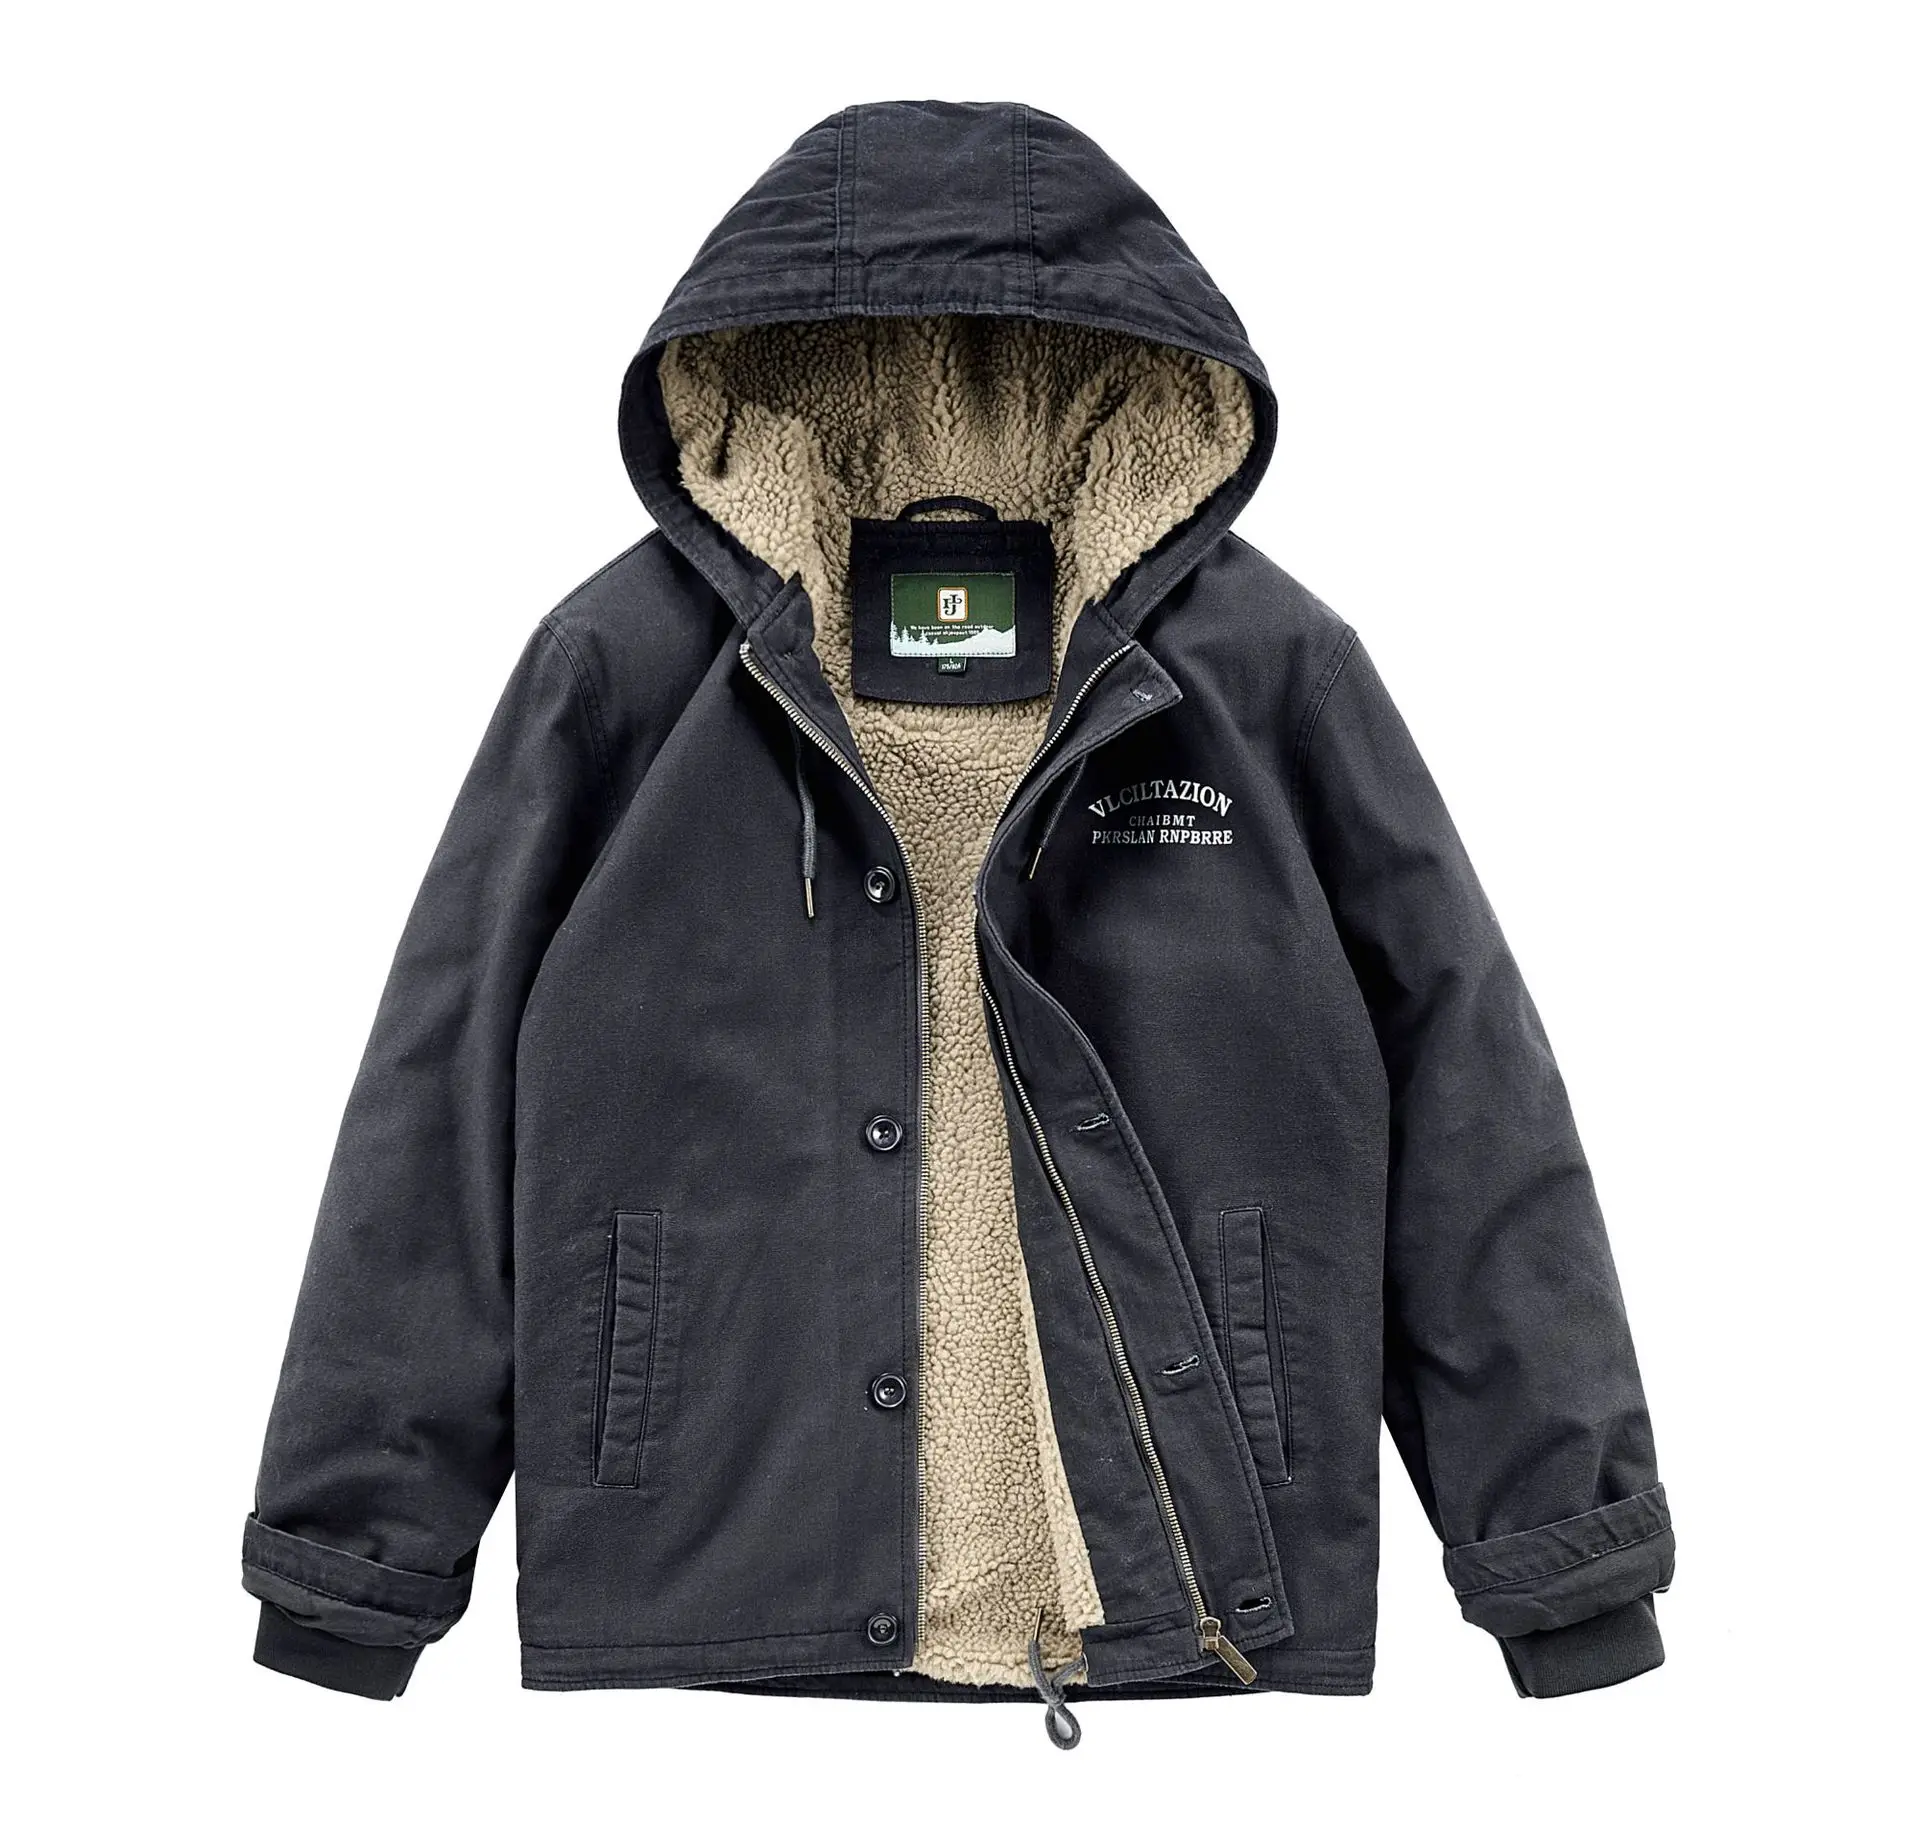 Men's Winter Jacket Padding Cotton Traveling Casual Thick Winter Polyester Parkas North Face Puffer Jacket Surprise Price